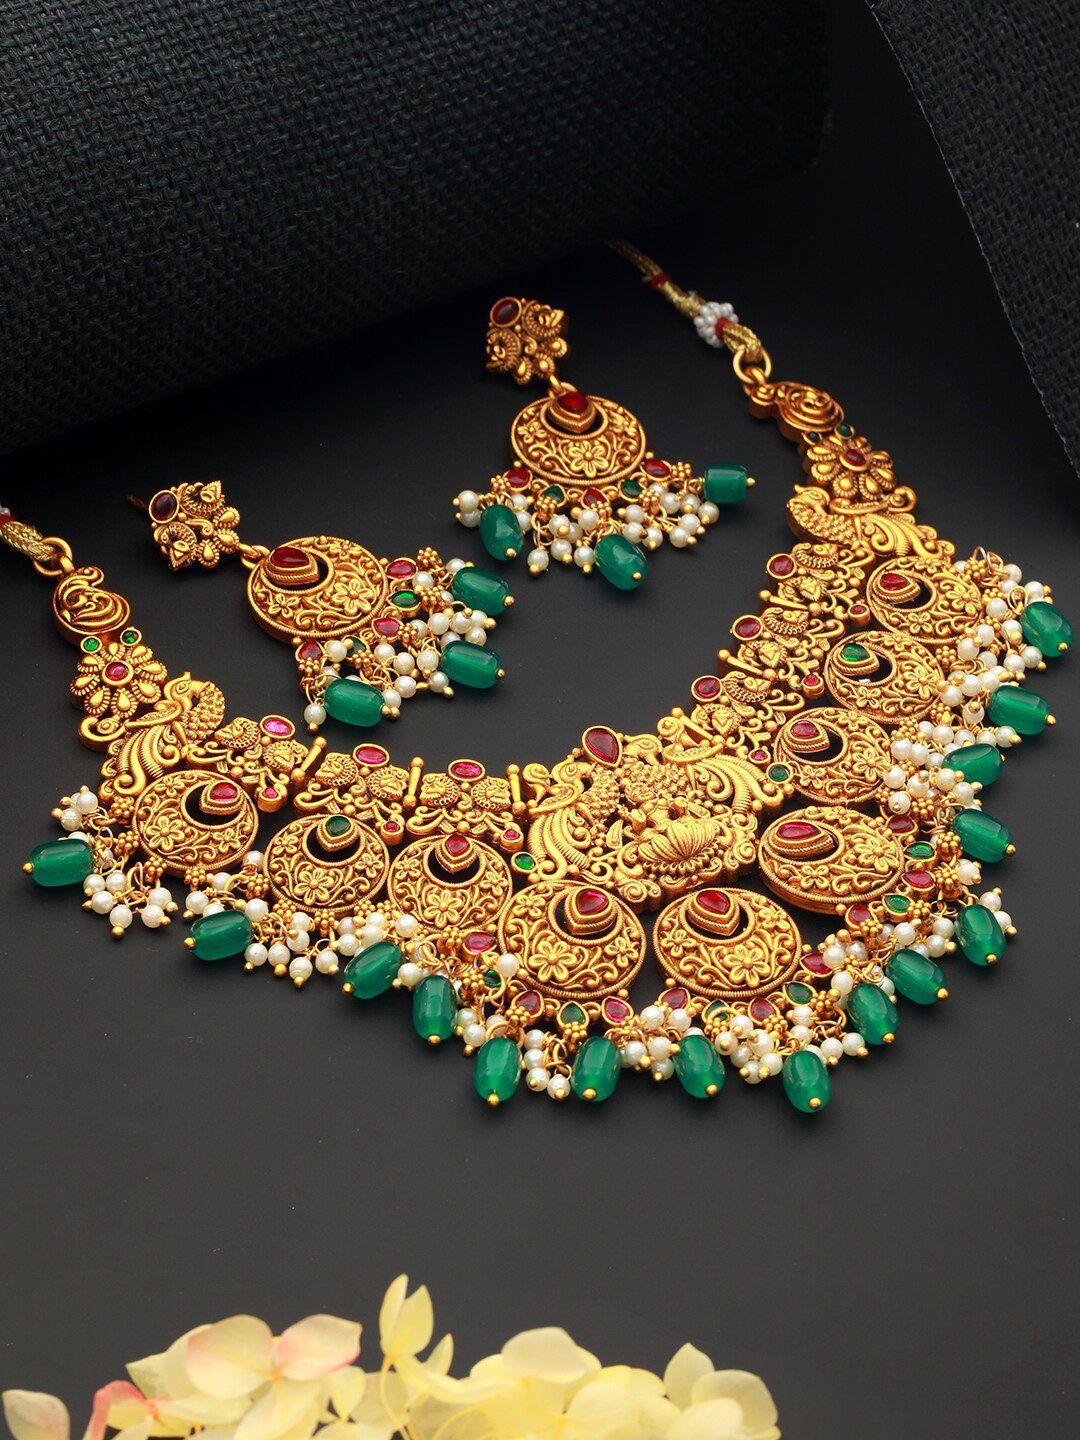 Saraf RS Jewellery Gold Plated CZ-Studded & Beaded Temple  Necklace & Earrings Set